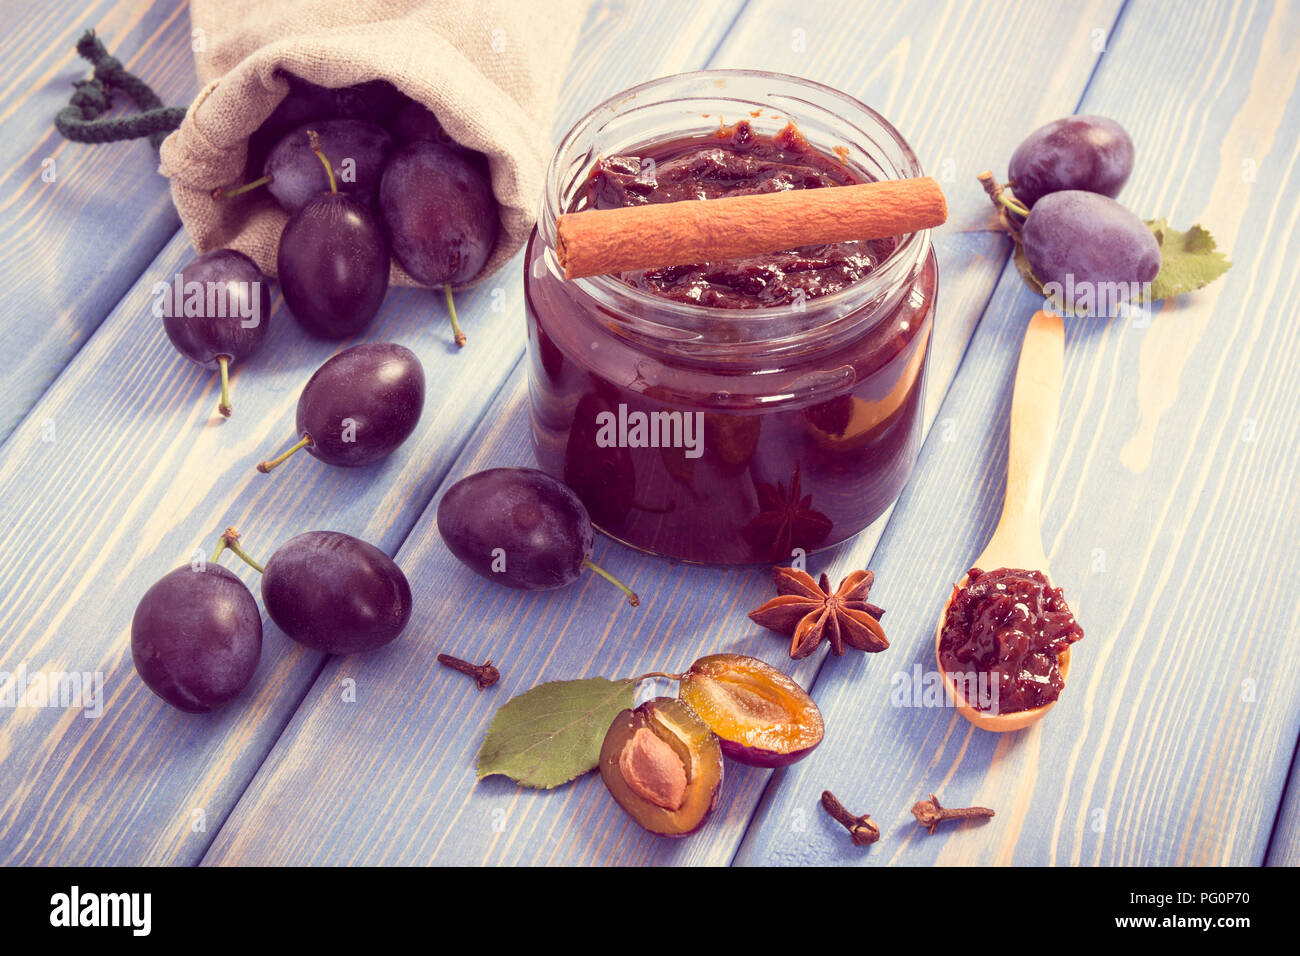 Vintage photo, Fresh plum jam or marmalade in glass jar, ripe fruits and spices on boards, concept of healthy sweet dessert Stock Photo